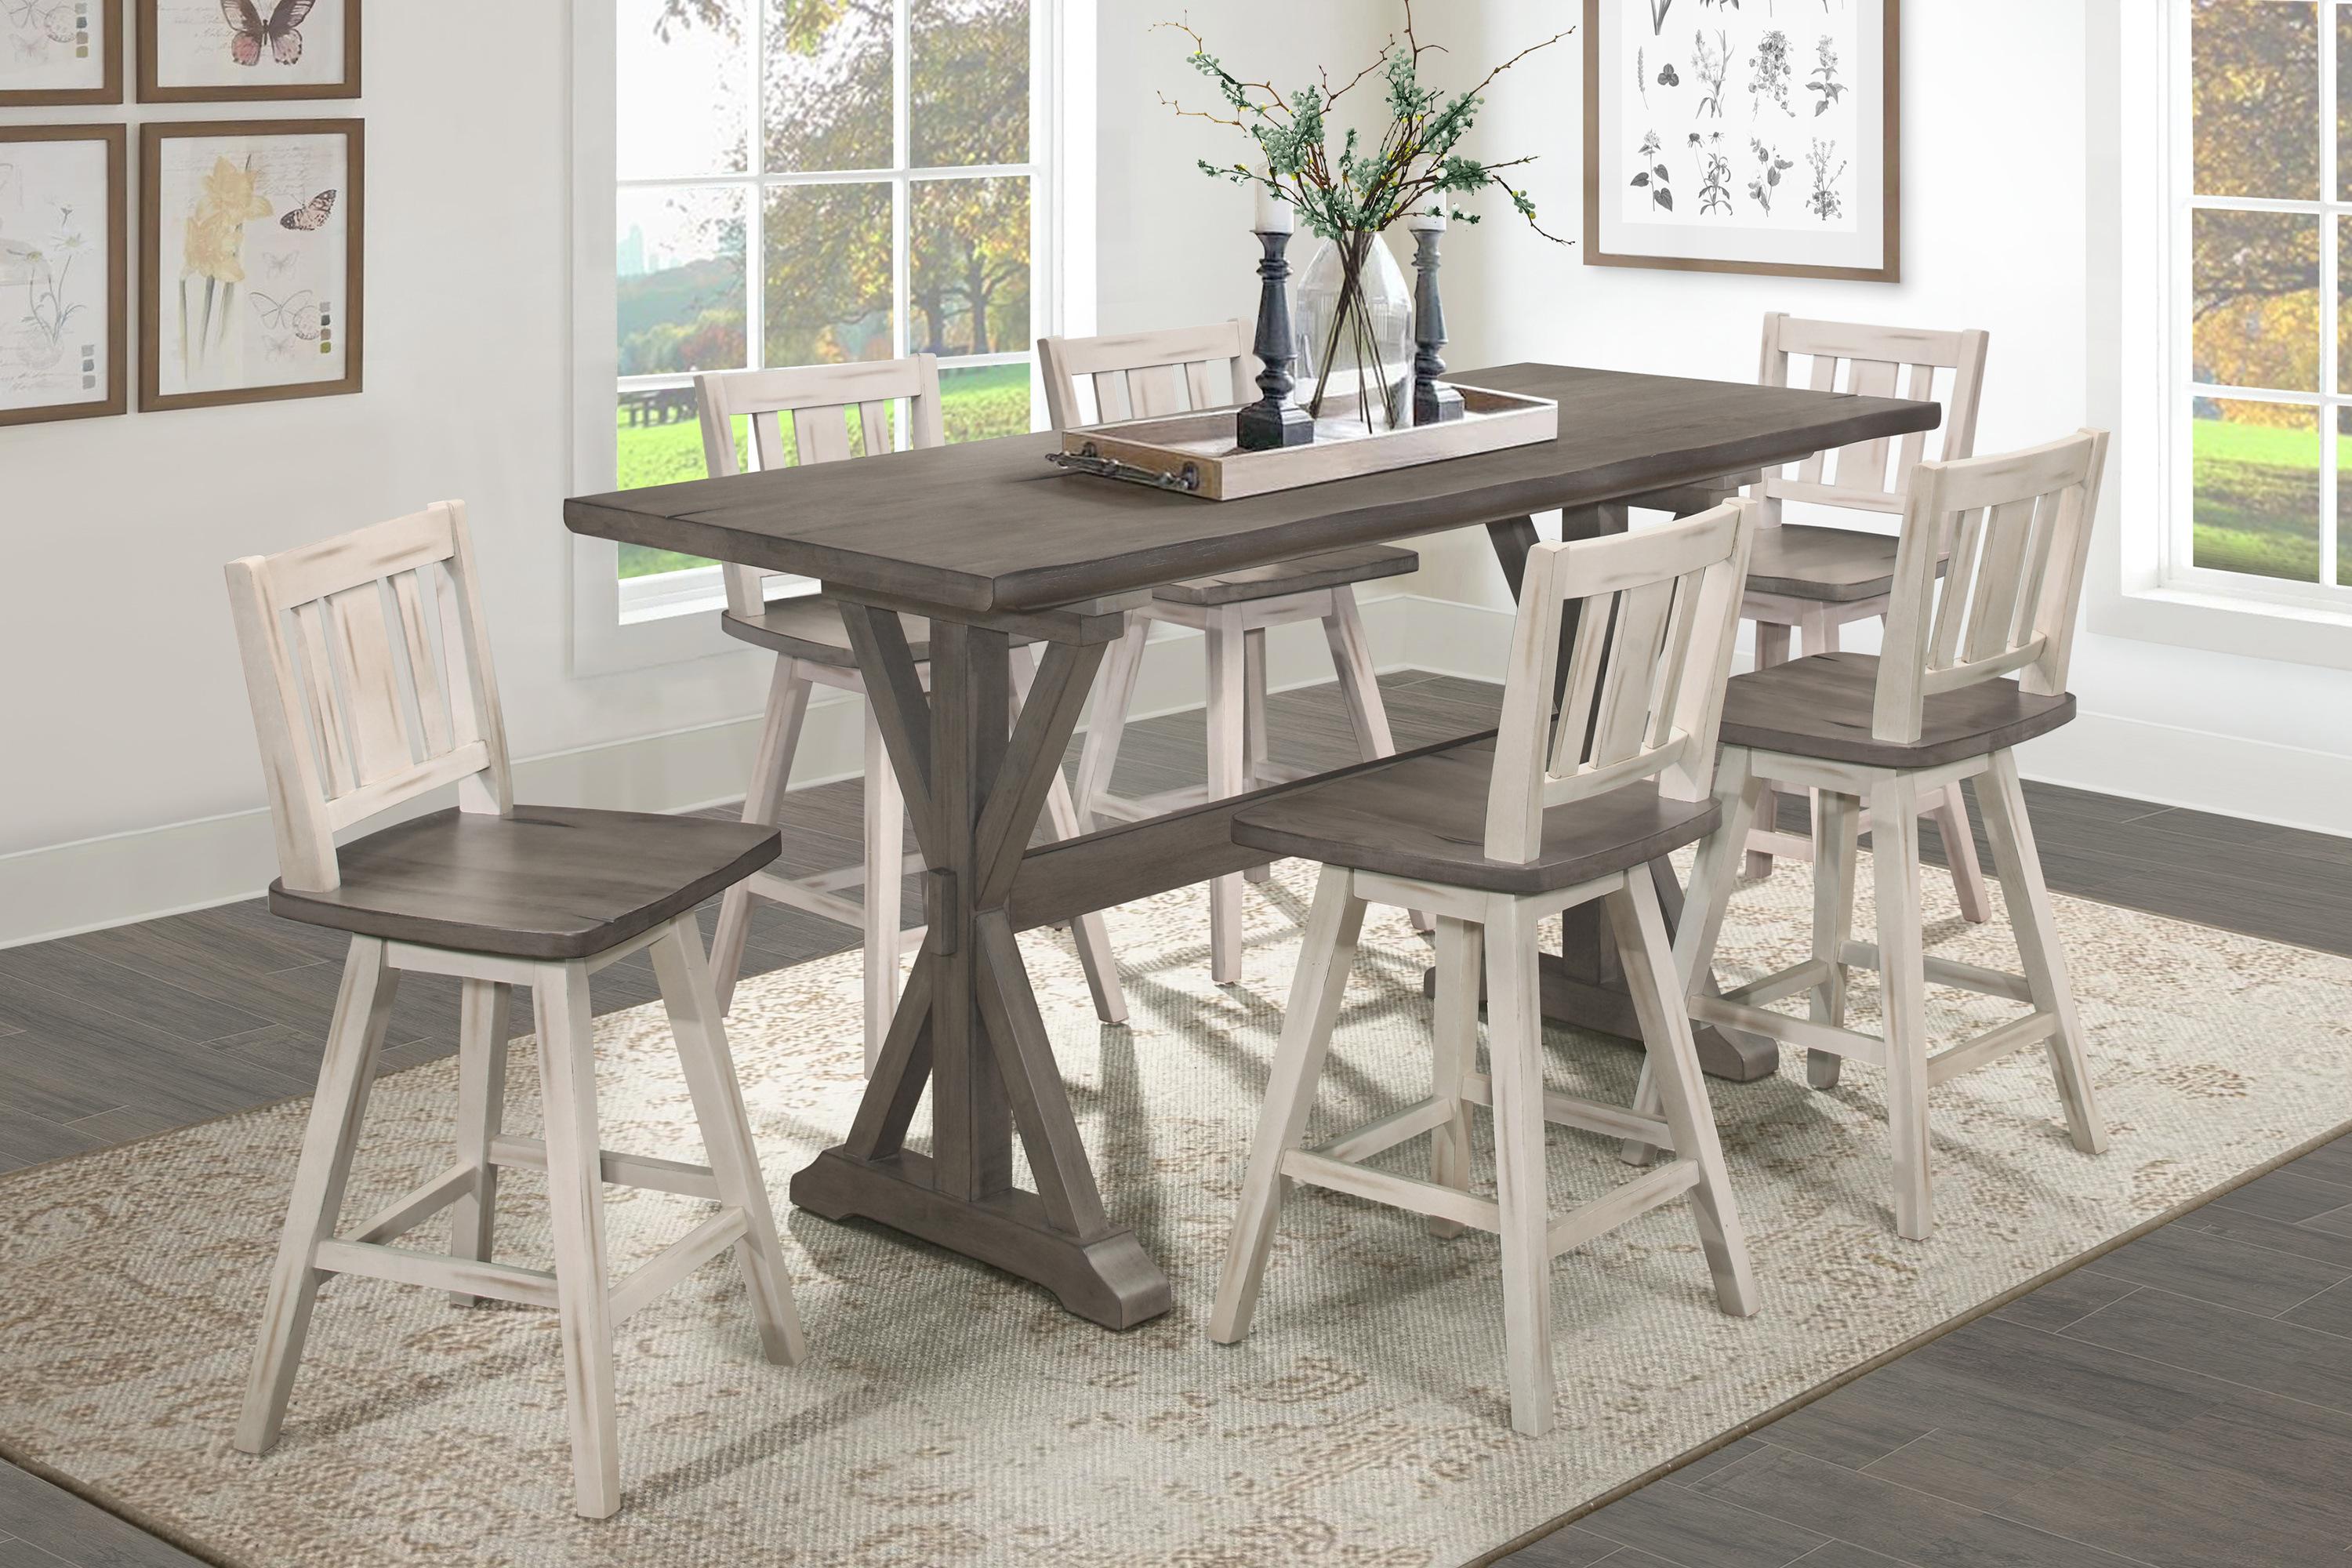 

    
Rustic Distressed Gray & White Solid Wood 24" Dining Room Set 5pcs Homelegance 5602-36-5PC Amsonia
